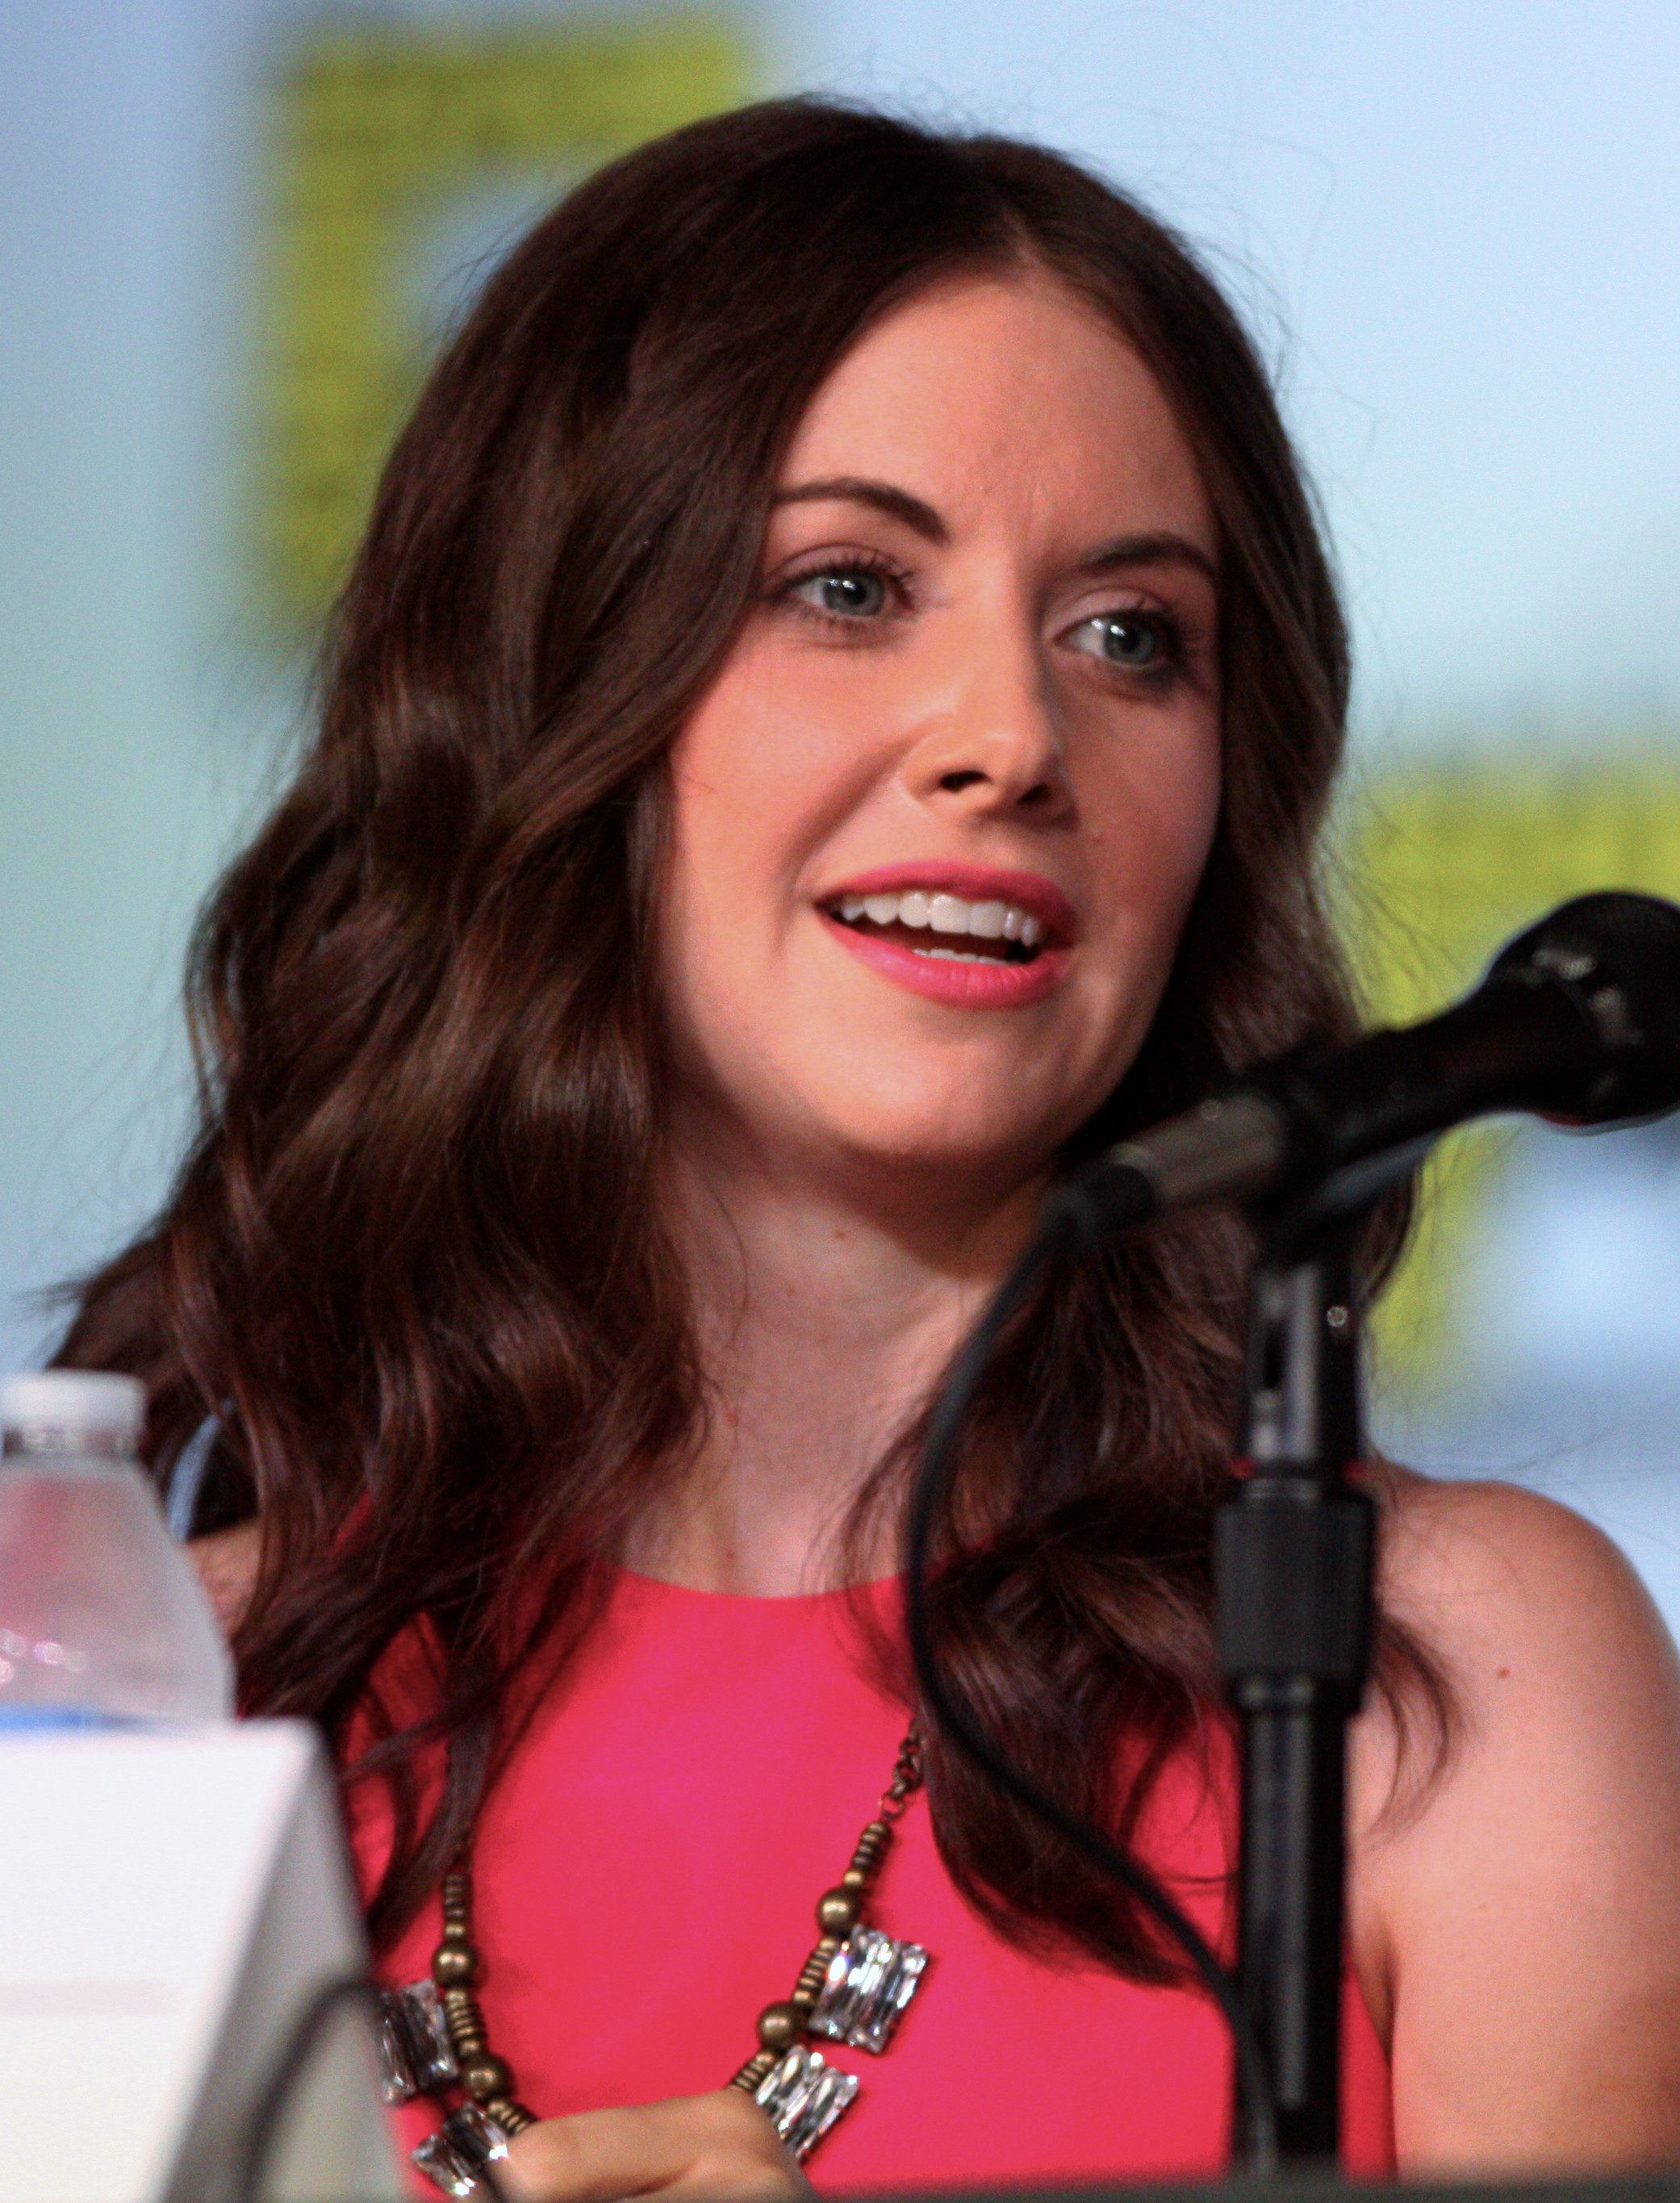 Who made Alison Brie's pink sequin dress, black tights, and pumps